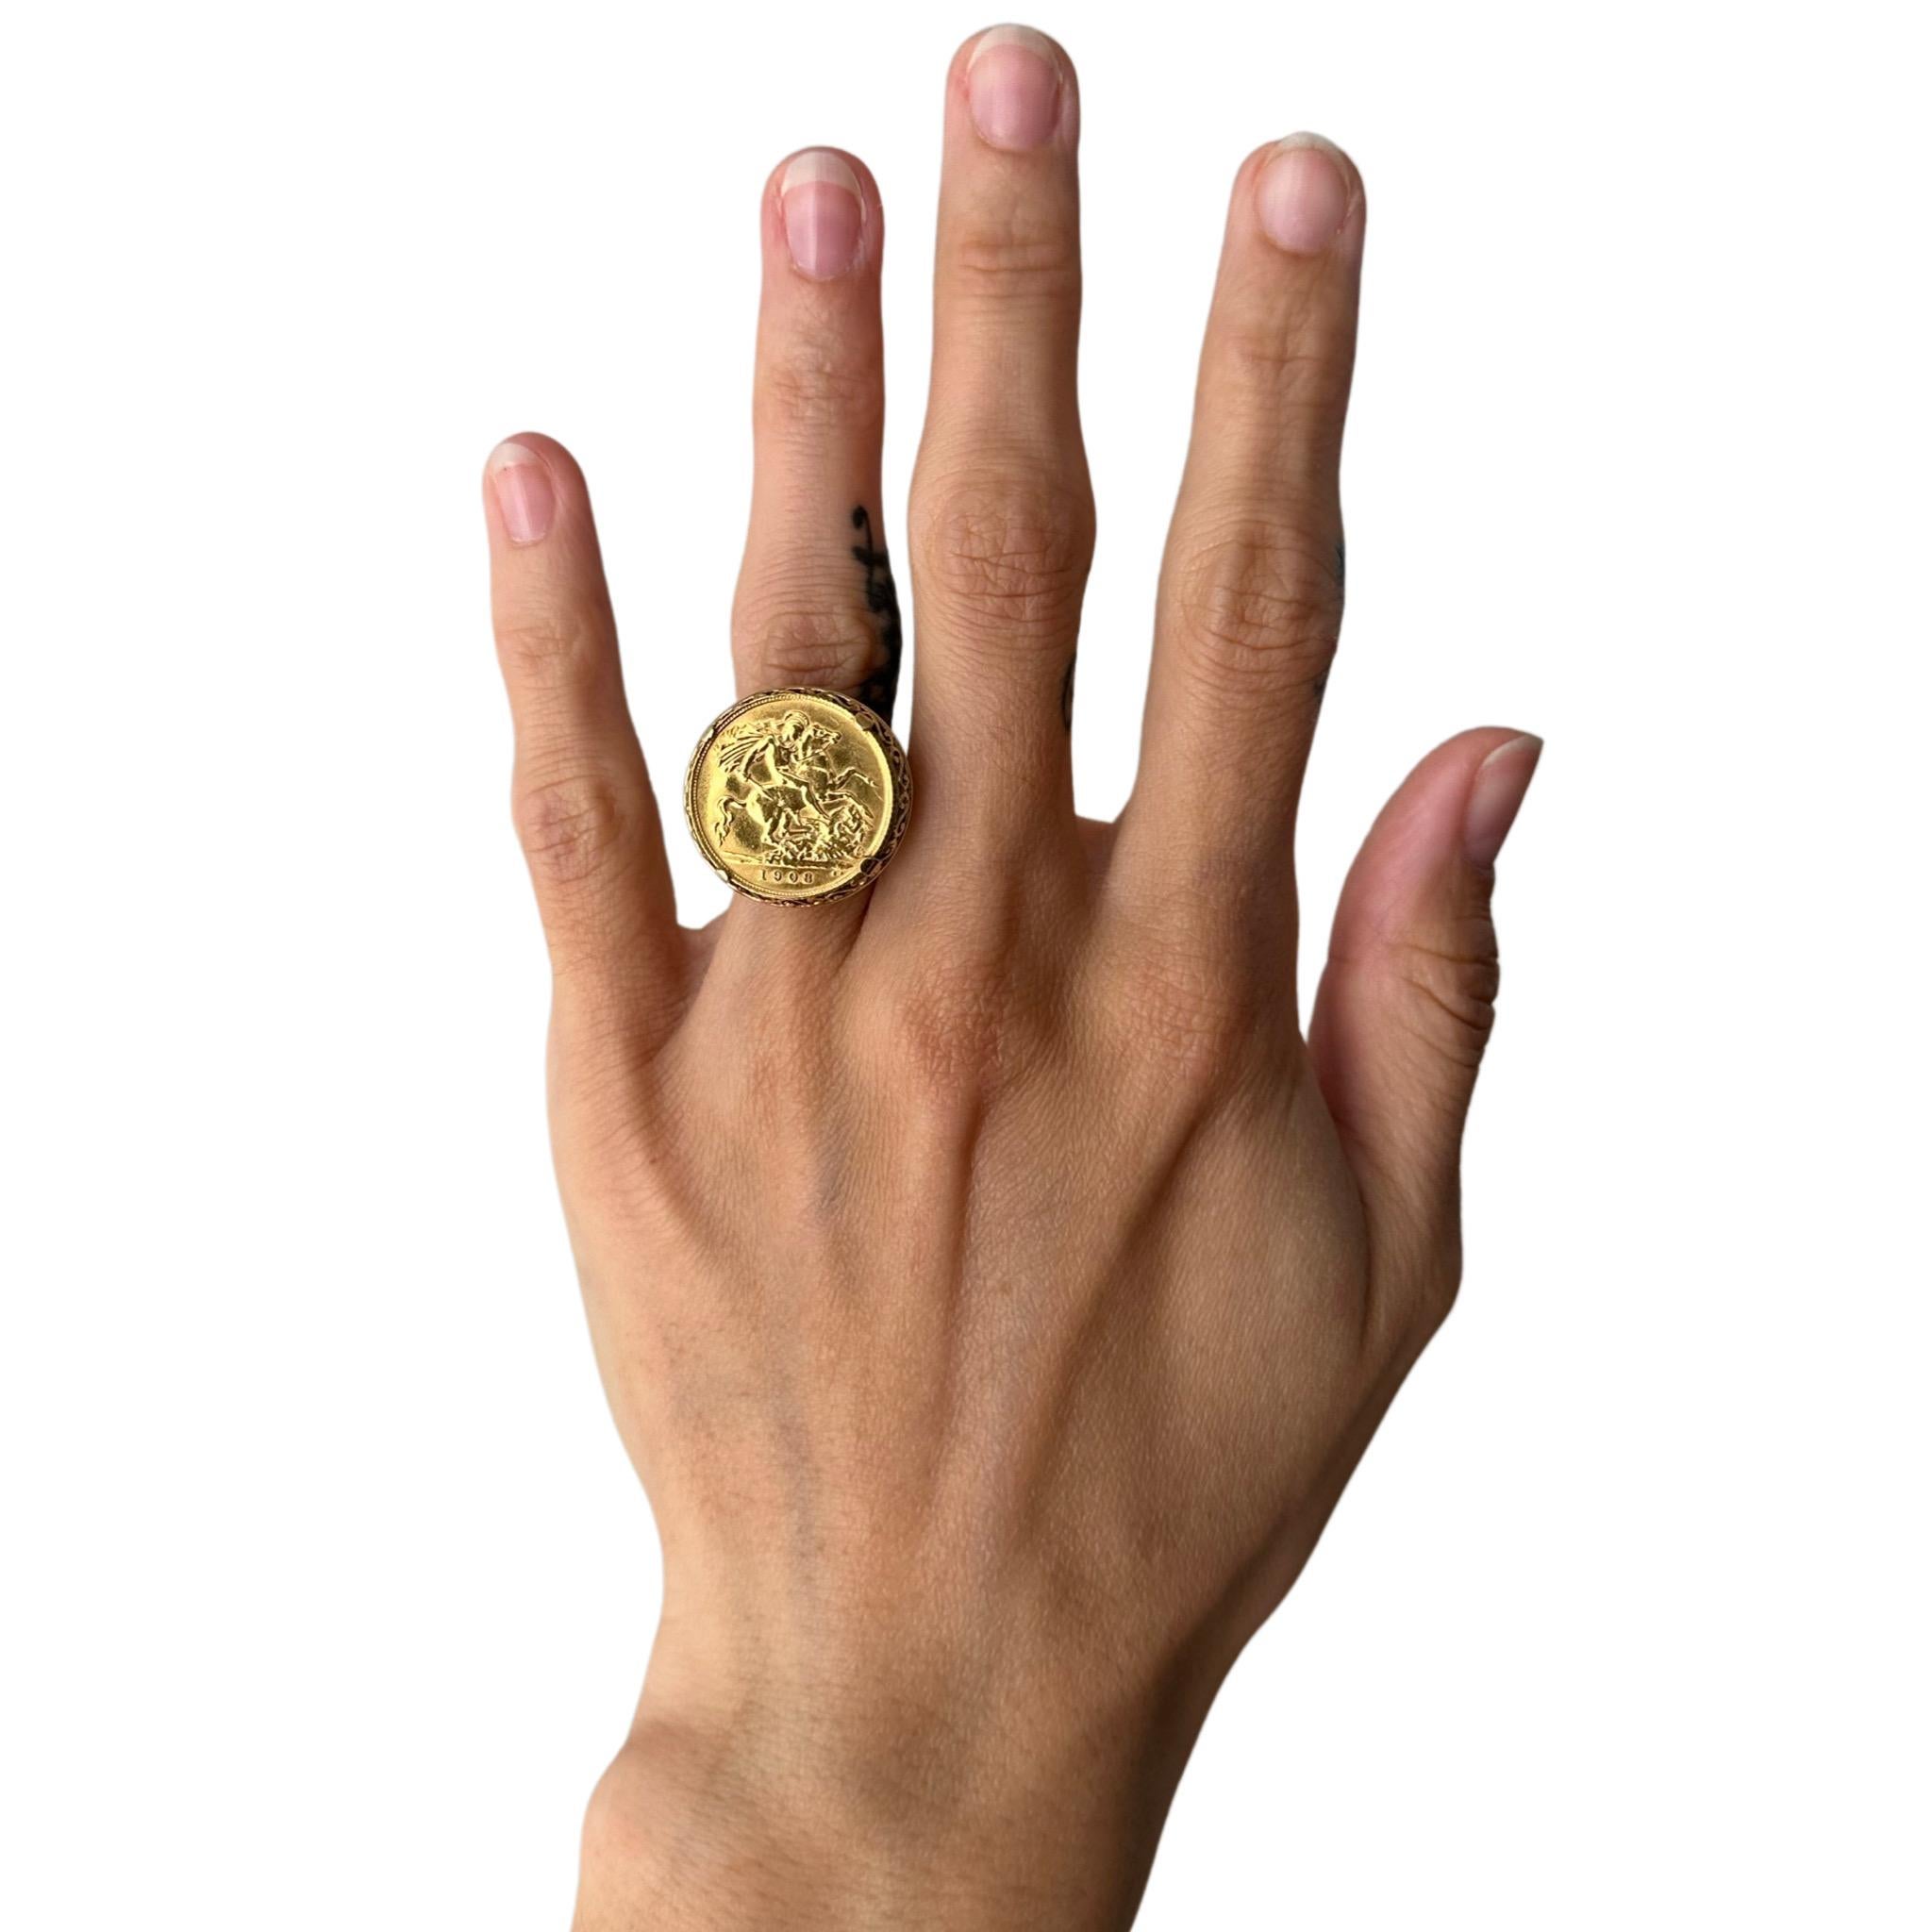 Vintage authentic one-of-a-kind Queen Victoria gold half sovereign (1908) ring, size 6 US. 8.92 grams of 14k (setting) and 18k (coin) yellow gold. Circa early 20th century. This antique ring is beautifully crafted and in excellent condition.